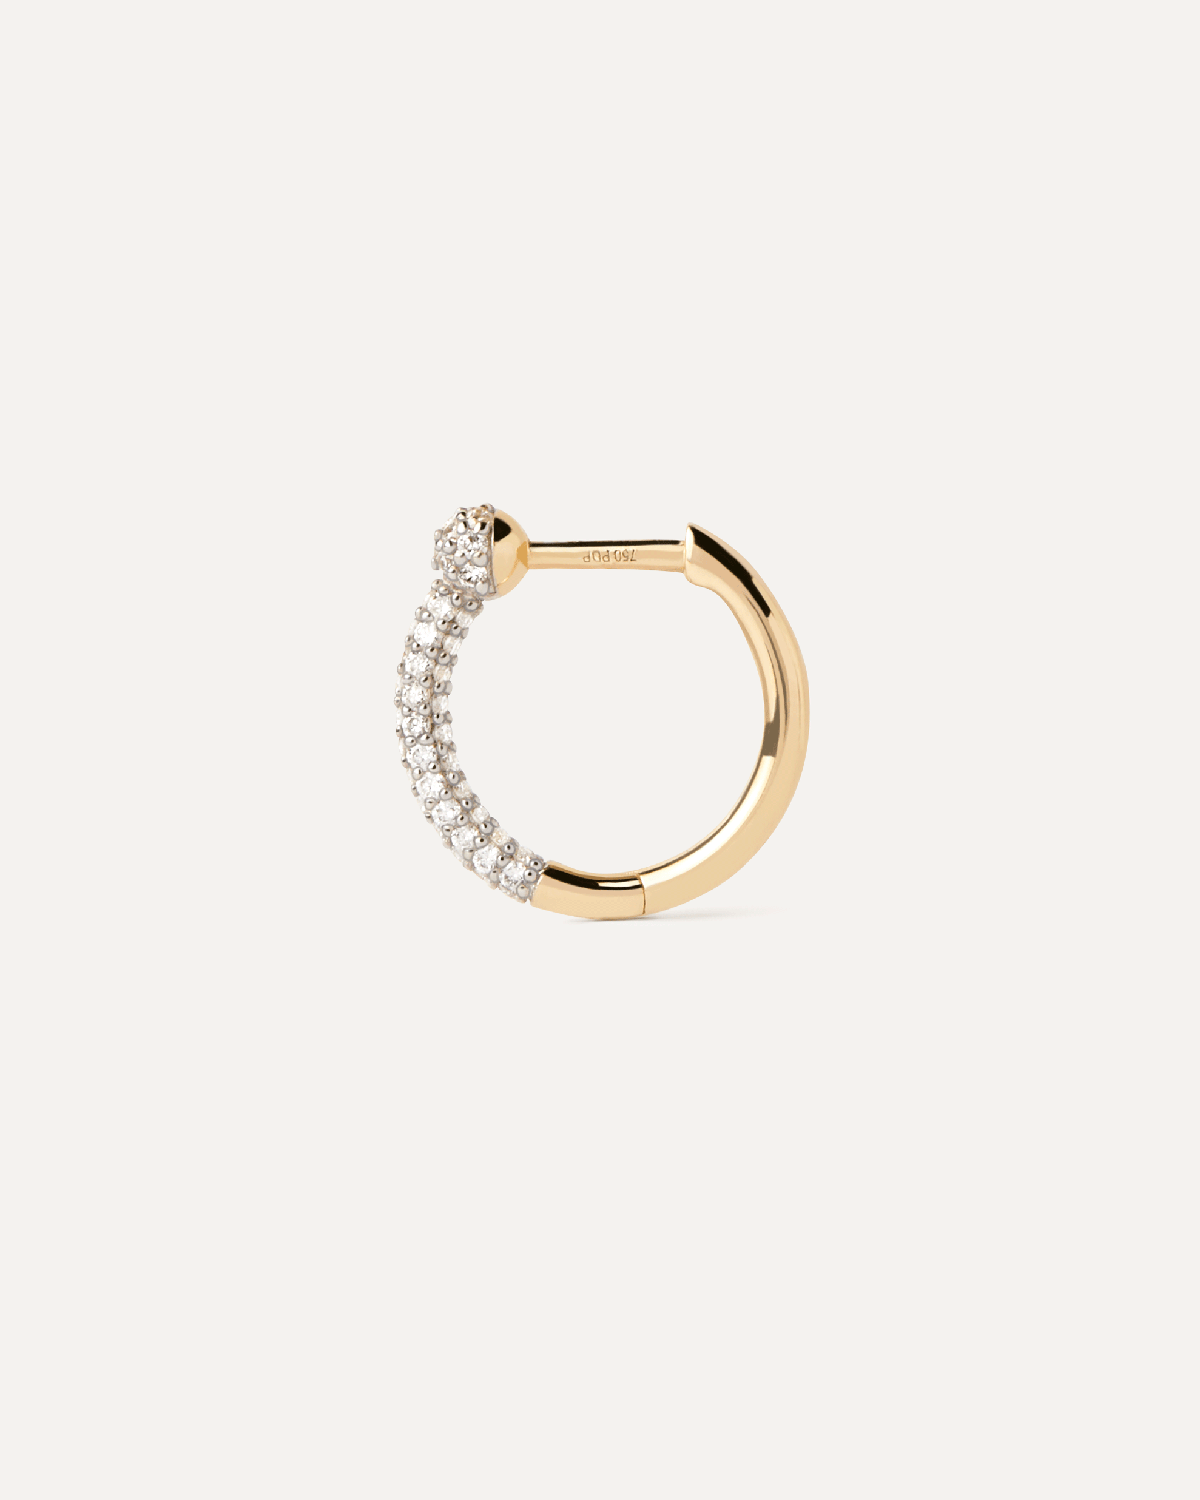 Diamonds and gold Chai Latte single hoop. Distinctive single hoop in solid yellow gold with round pavé and a row of lab-grown diamonds  . Get the latest arrival from PDPAOLA. Place your order safely and get this Best Seller.